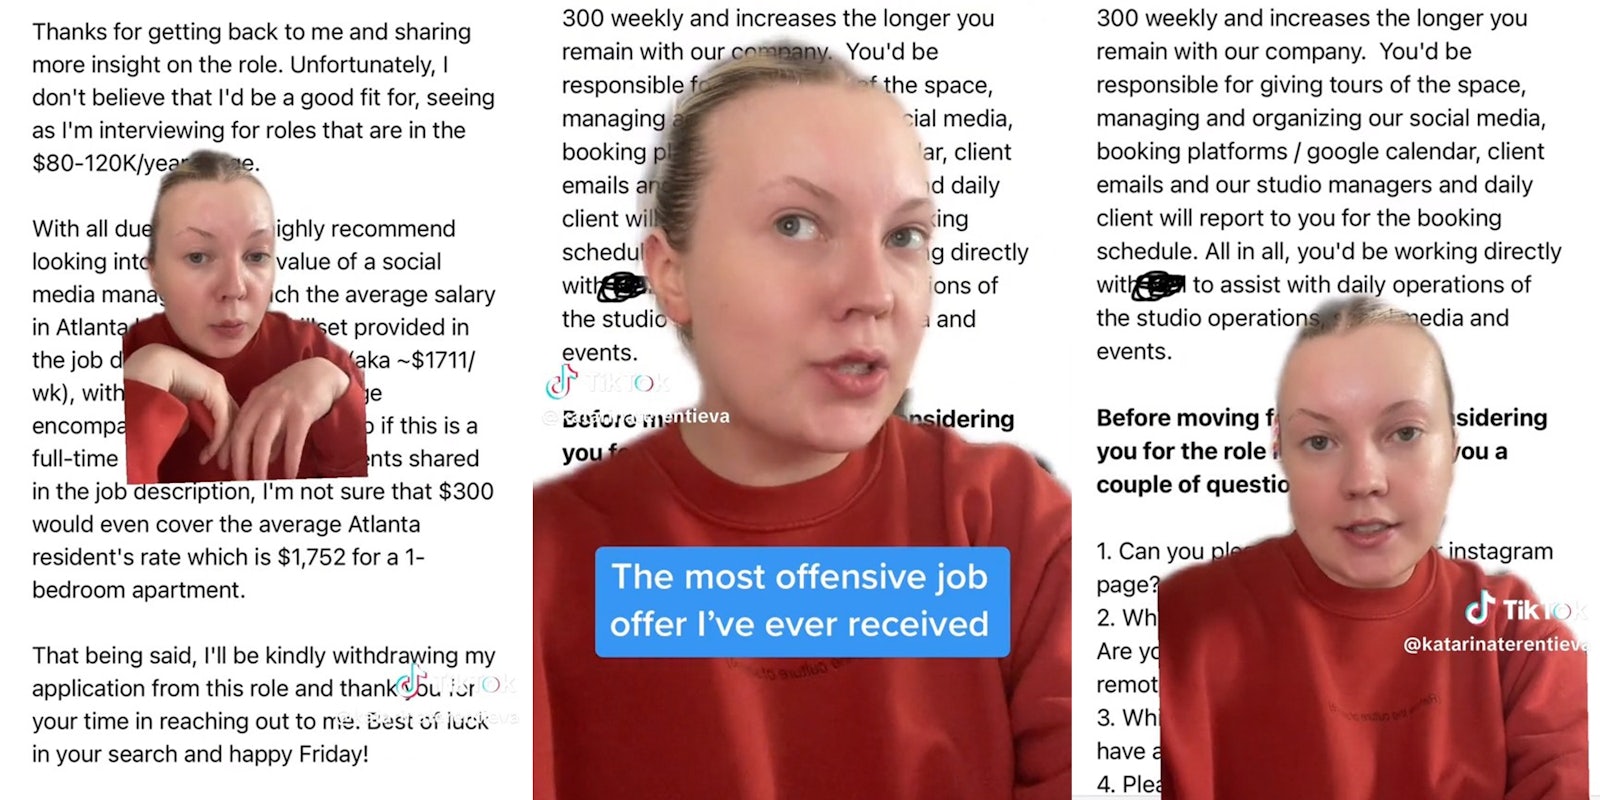 Woman Withdraws Application After Being Offered $300 a Week for Job